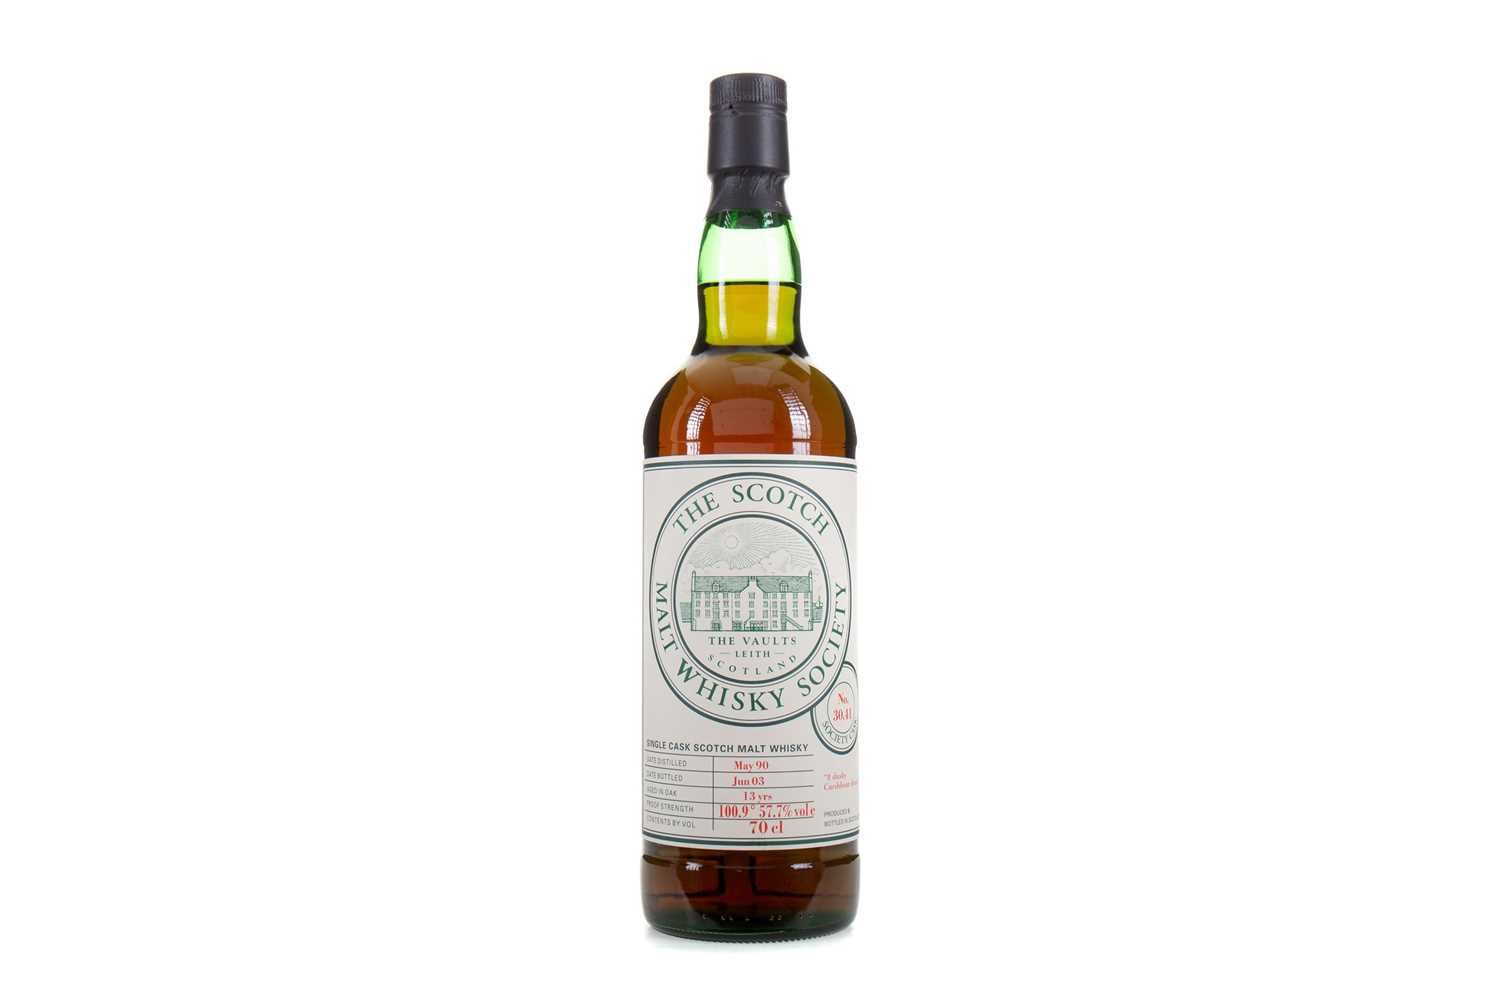 Lot 510 - SMWS 30.41 GLENROTHES 1990 13 YEAR OLD